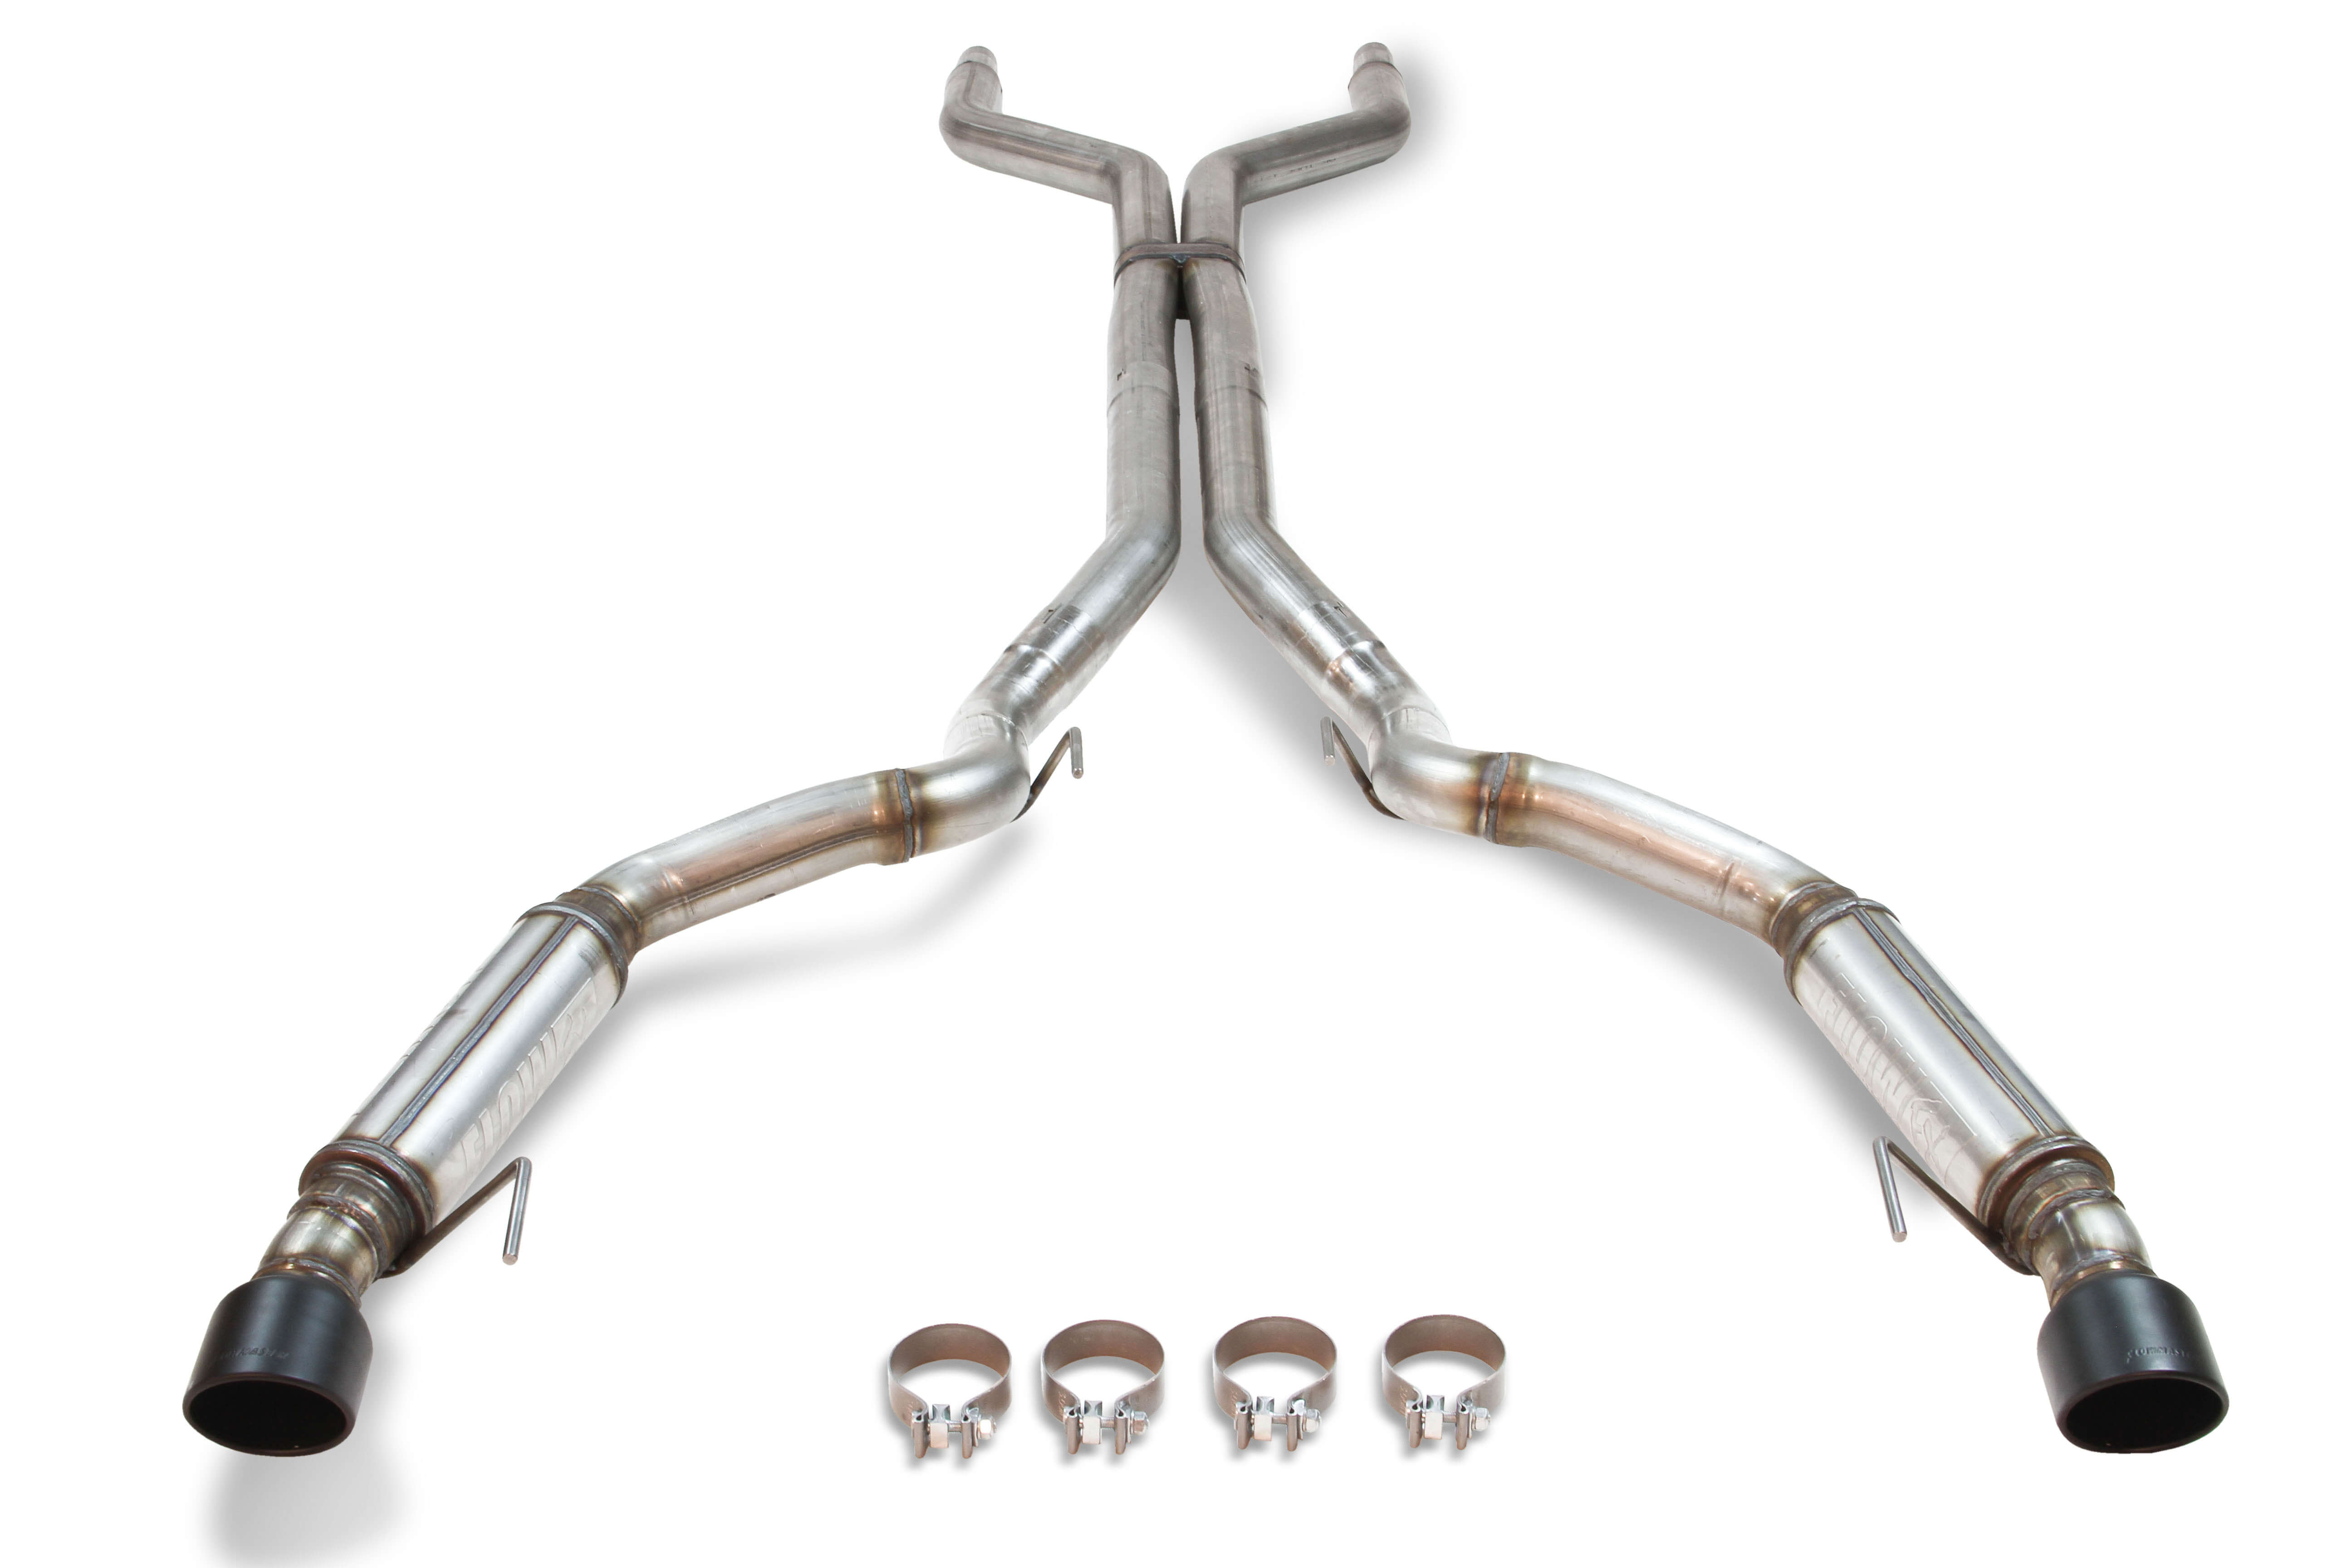 2015-2017 Ford Mustang GT 5.0L V8 Flowmaster lowFX Dual Exit Cat-back Exhaust System